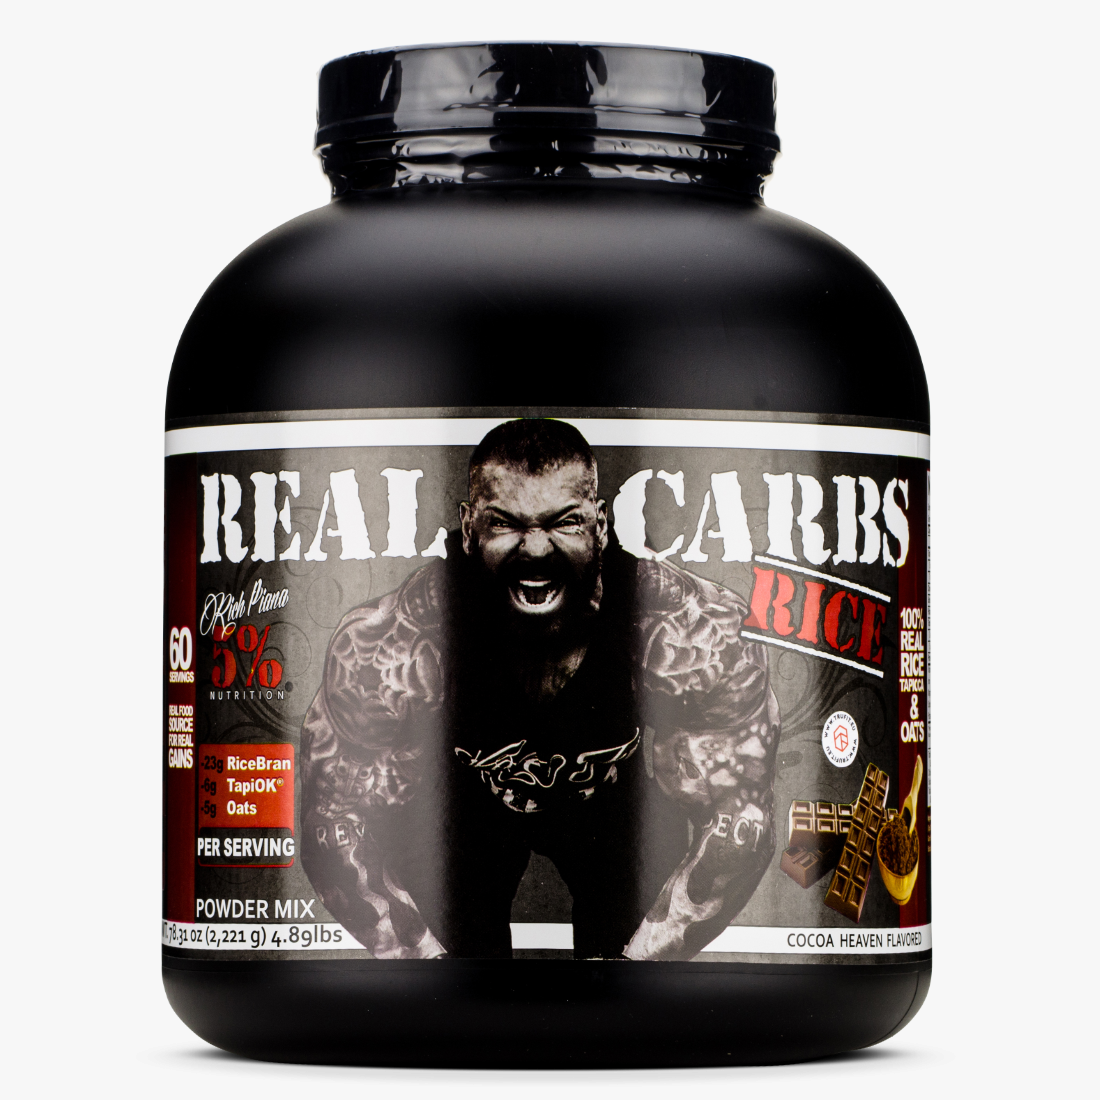 5% Nutrition REAL CARBS RICE Complex Carbohydrates Food 4 lbs COCOA HEAVEN 